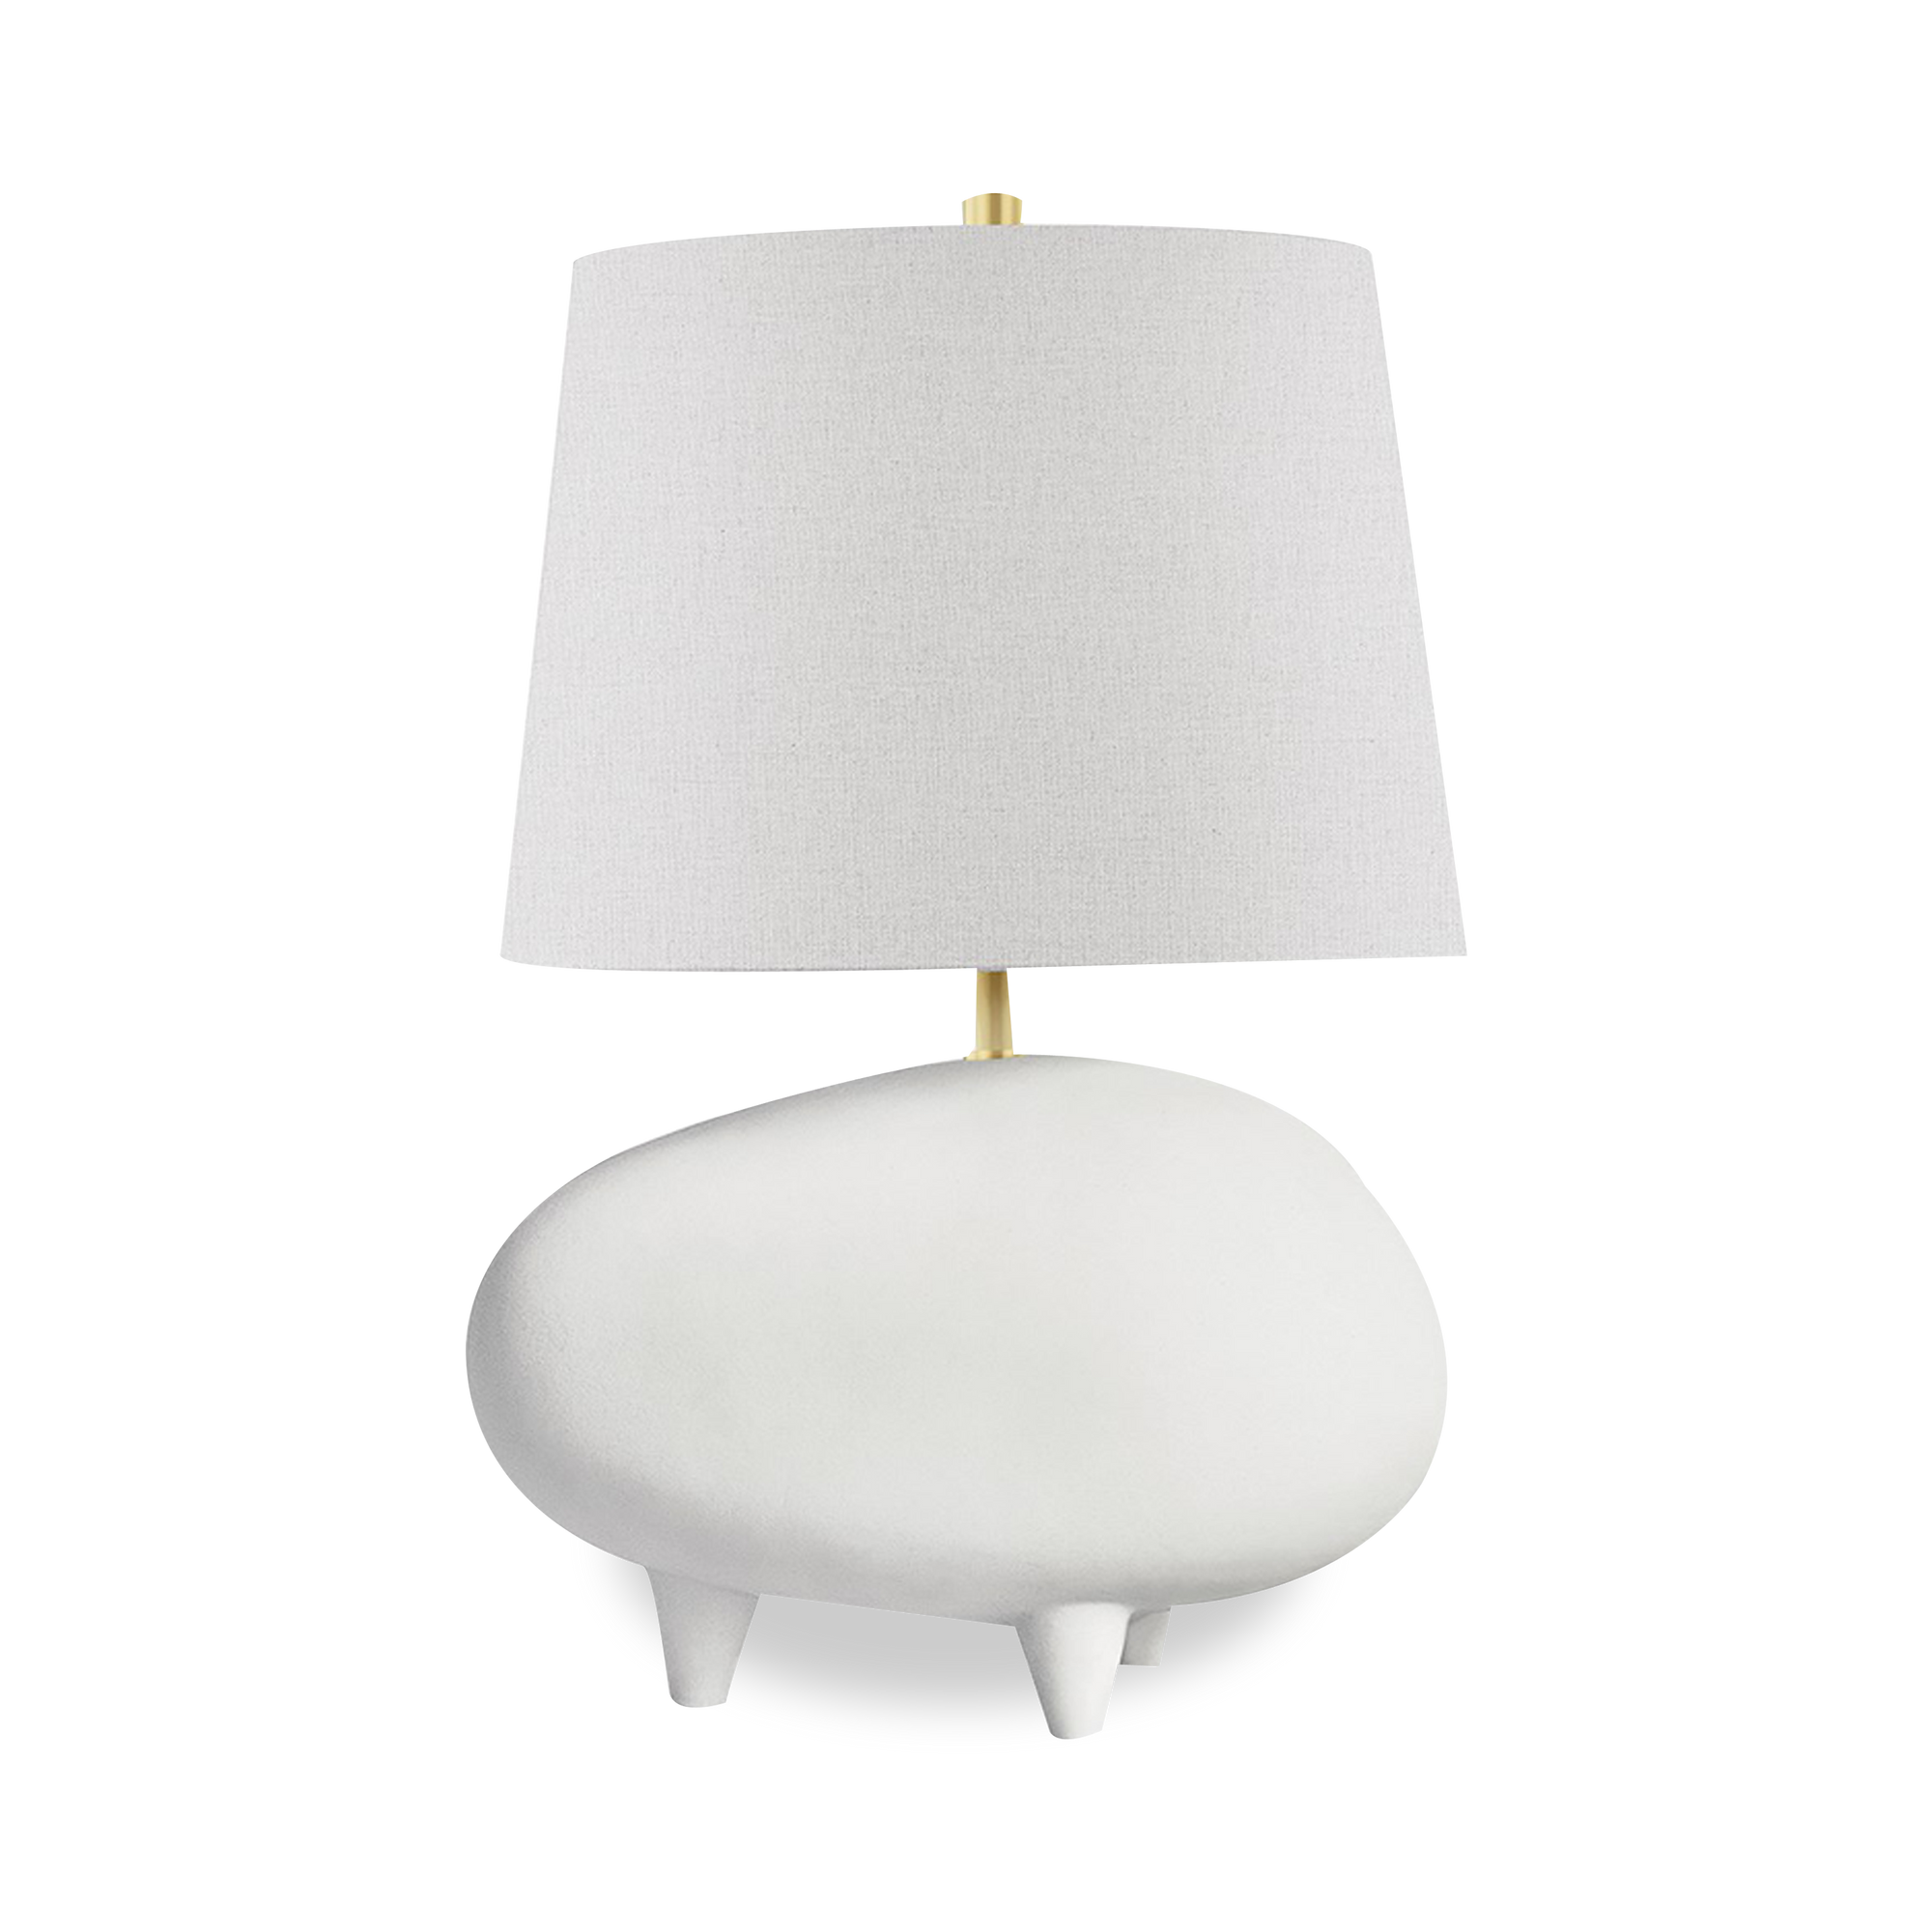 Drawing on the spirit of French sculptors of the ‘40s, Tiptoe is a unique table lamp combining a smooth organic body of ceramic in matte finish, unusual and contemporary, with br